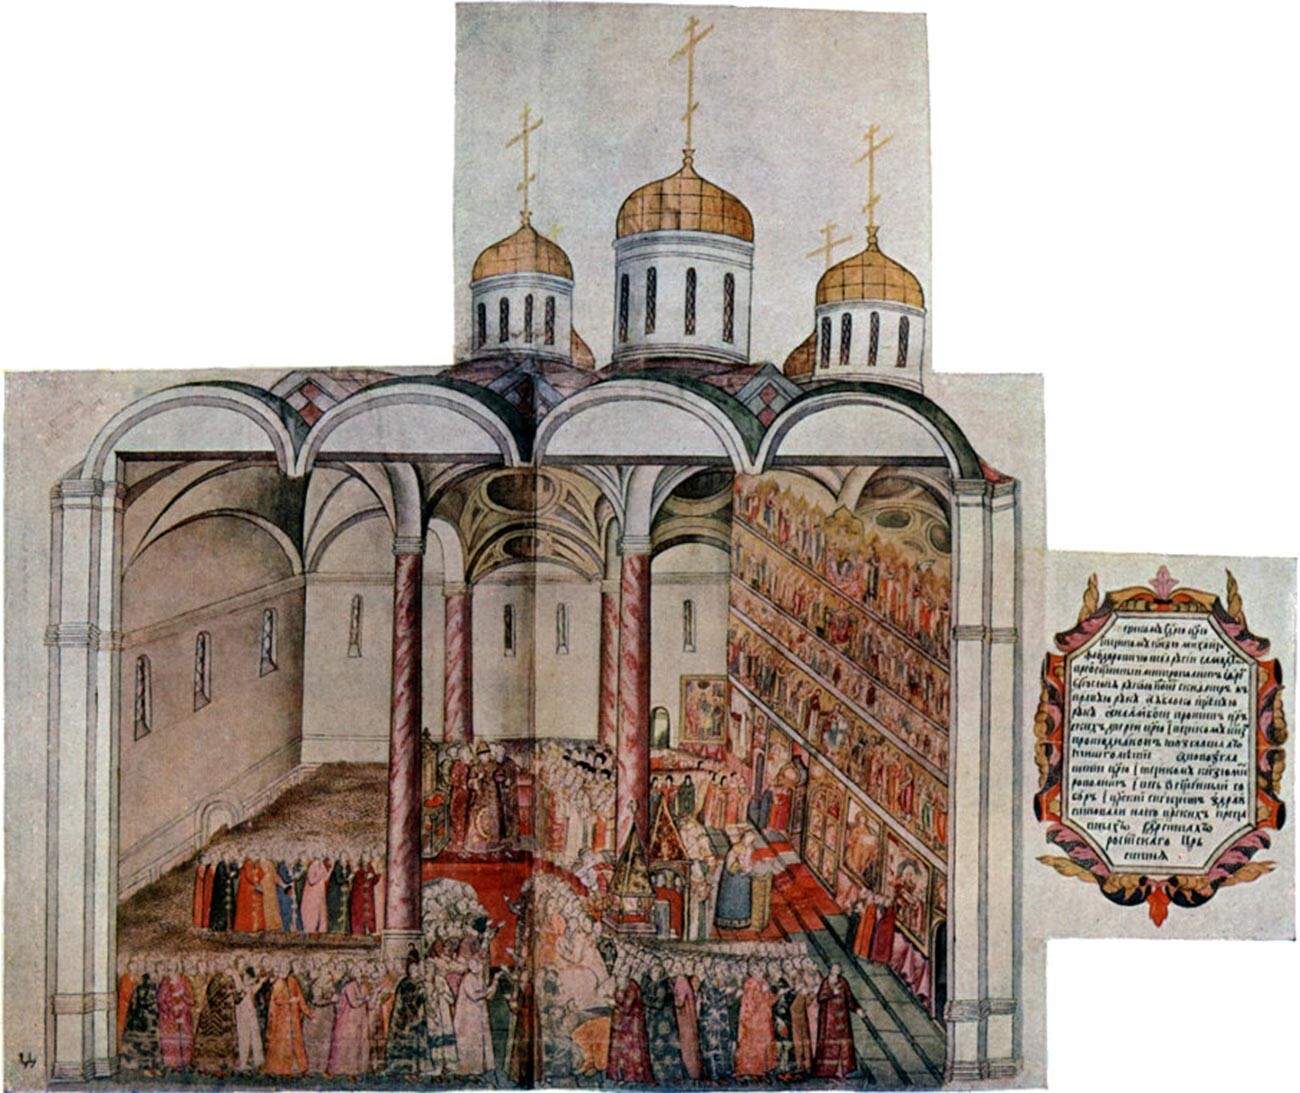 Dormition Cathedral. Enthronement of Mikhail Romanov. Reproduction of 1673 illustration published in P. G. Vasenko, Romanov Boyars and the Enthronement of Mikhail Fedorovich (St. Petersburg, 1913). 